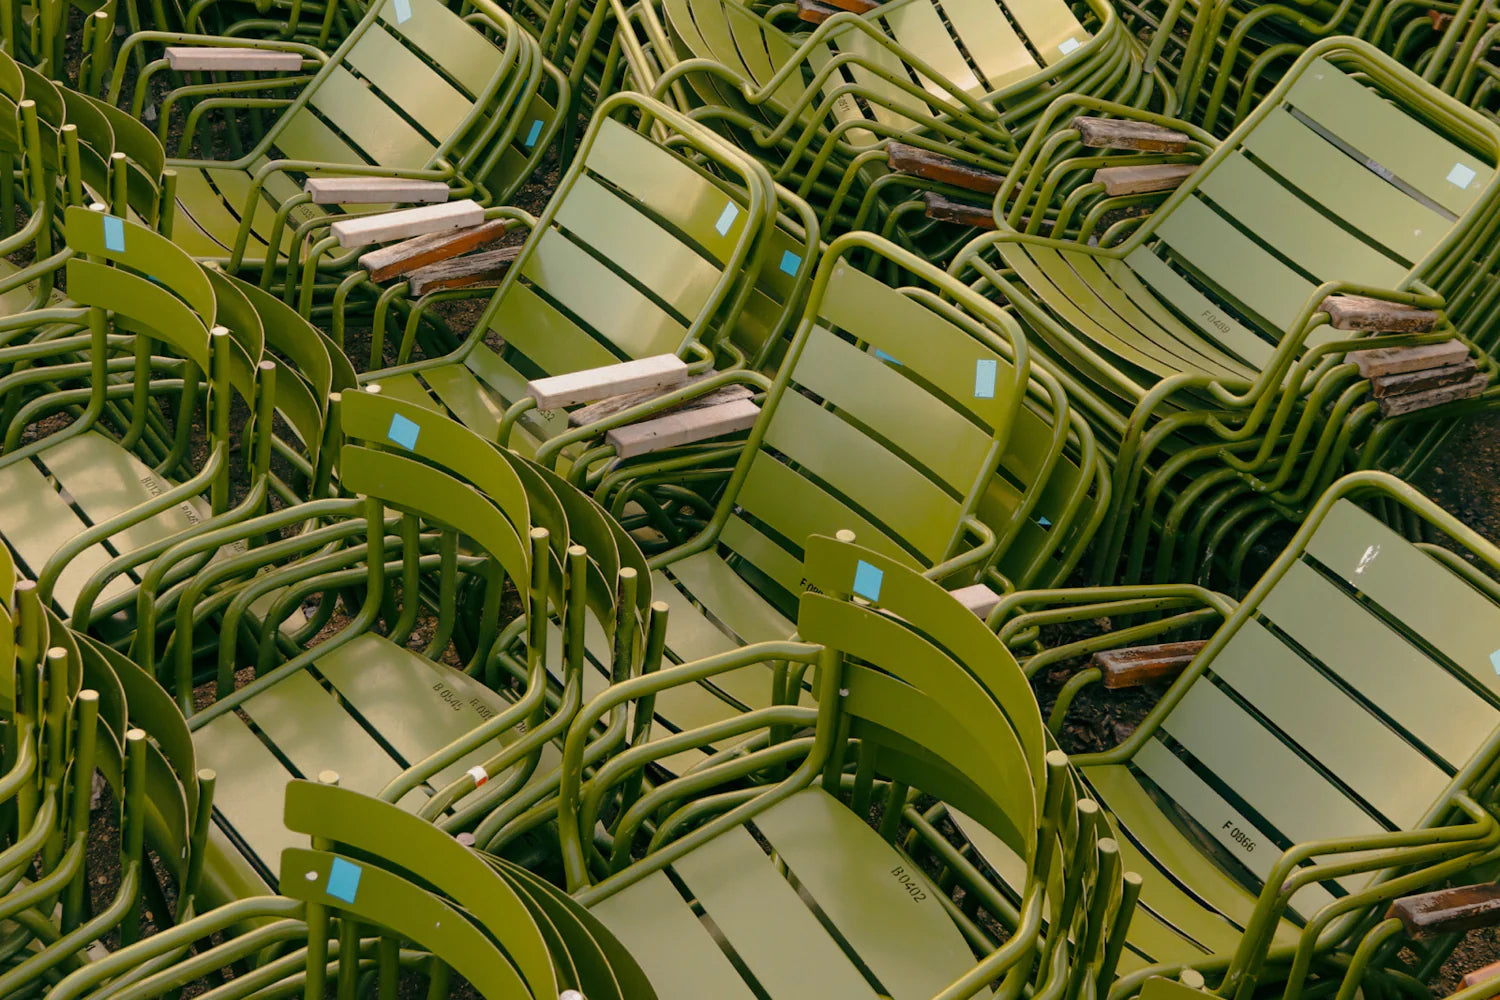 Stacks of green metal chairs in a warehouse